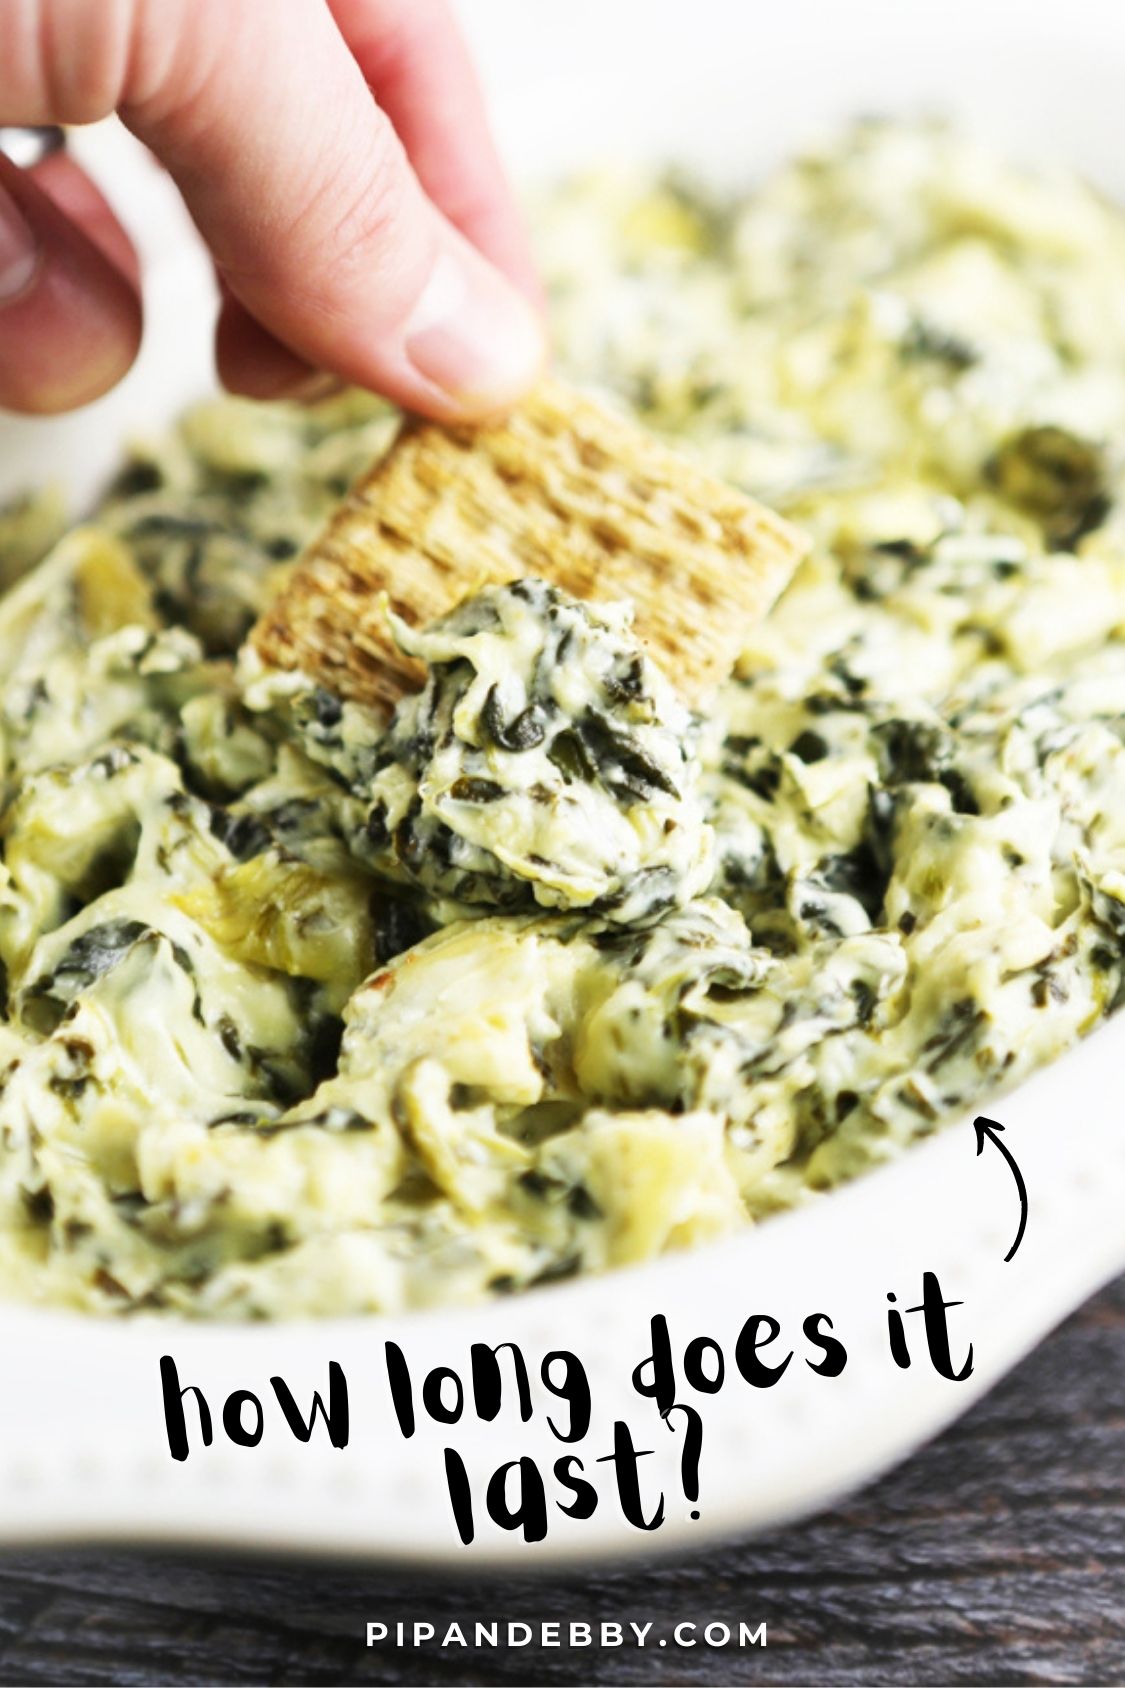 Spinach dip photo with text overlay reading, "How long does it last?"